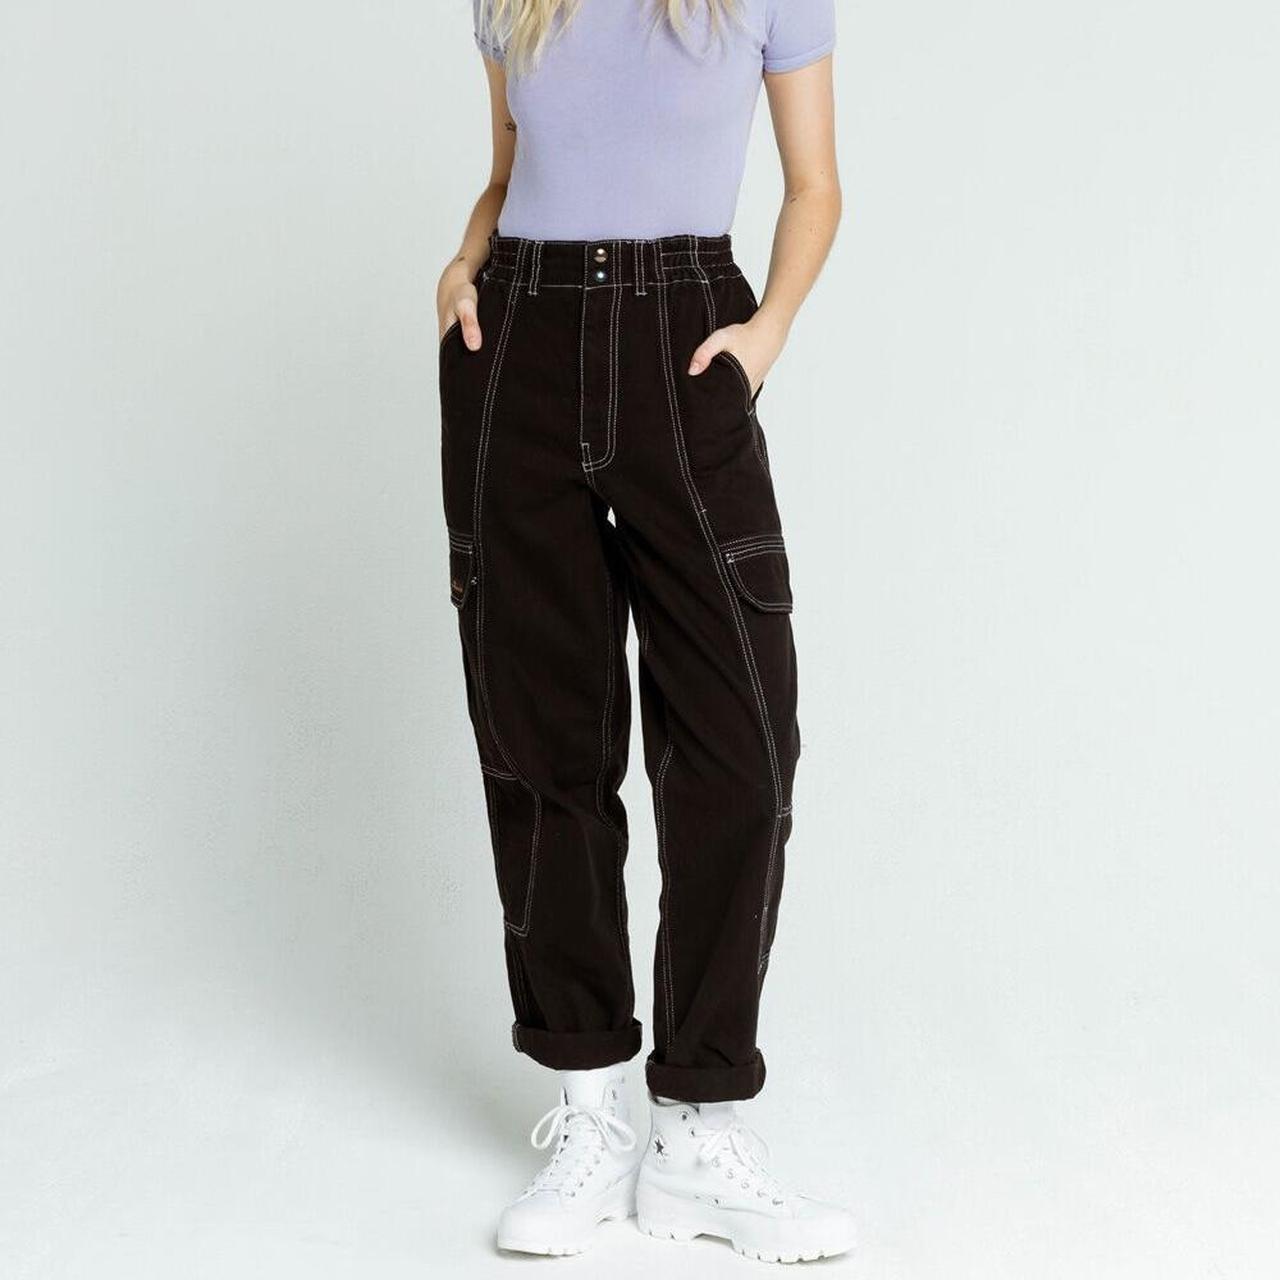 BDG Tyra Workwear Trousers | Urban Outfitters UK